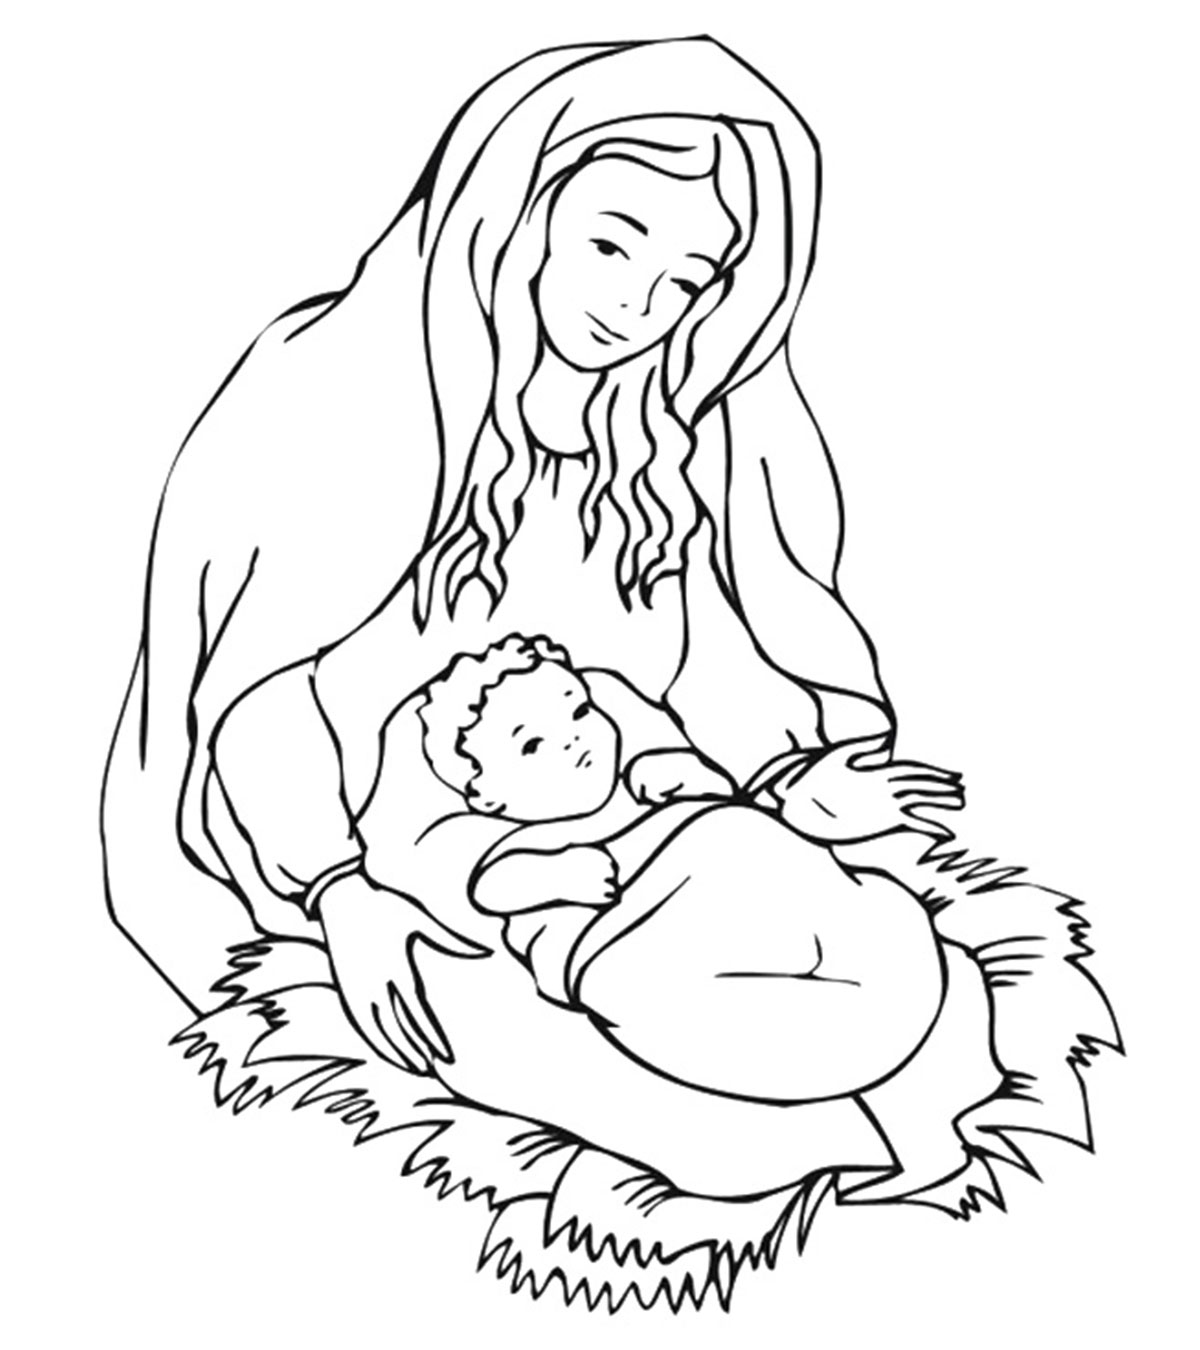 25 Amazing Christmas Coloring Pages Your Little Ones Will Love To Color_image